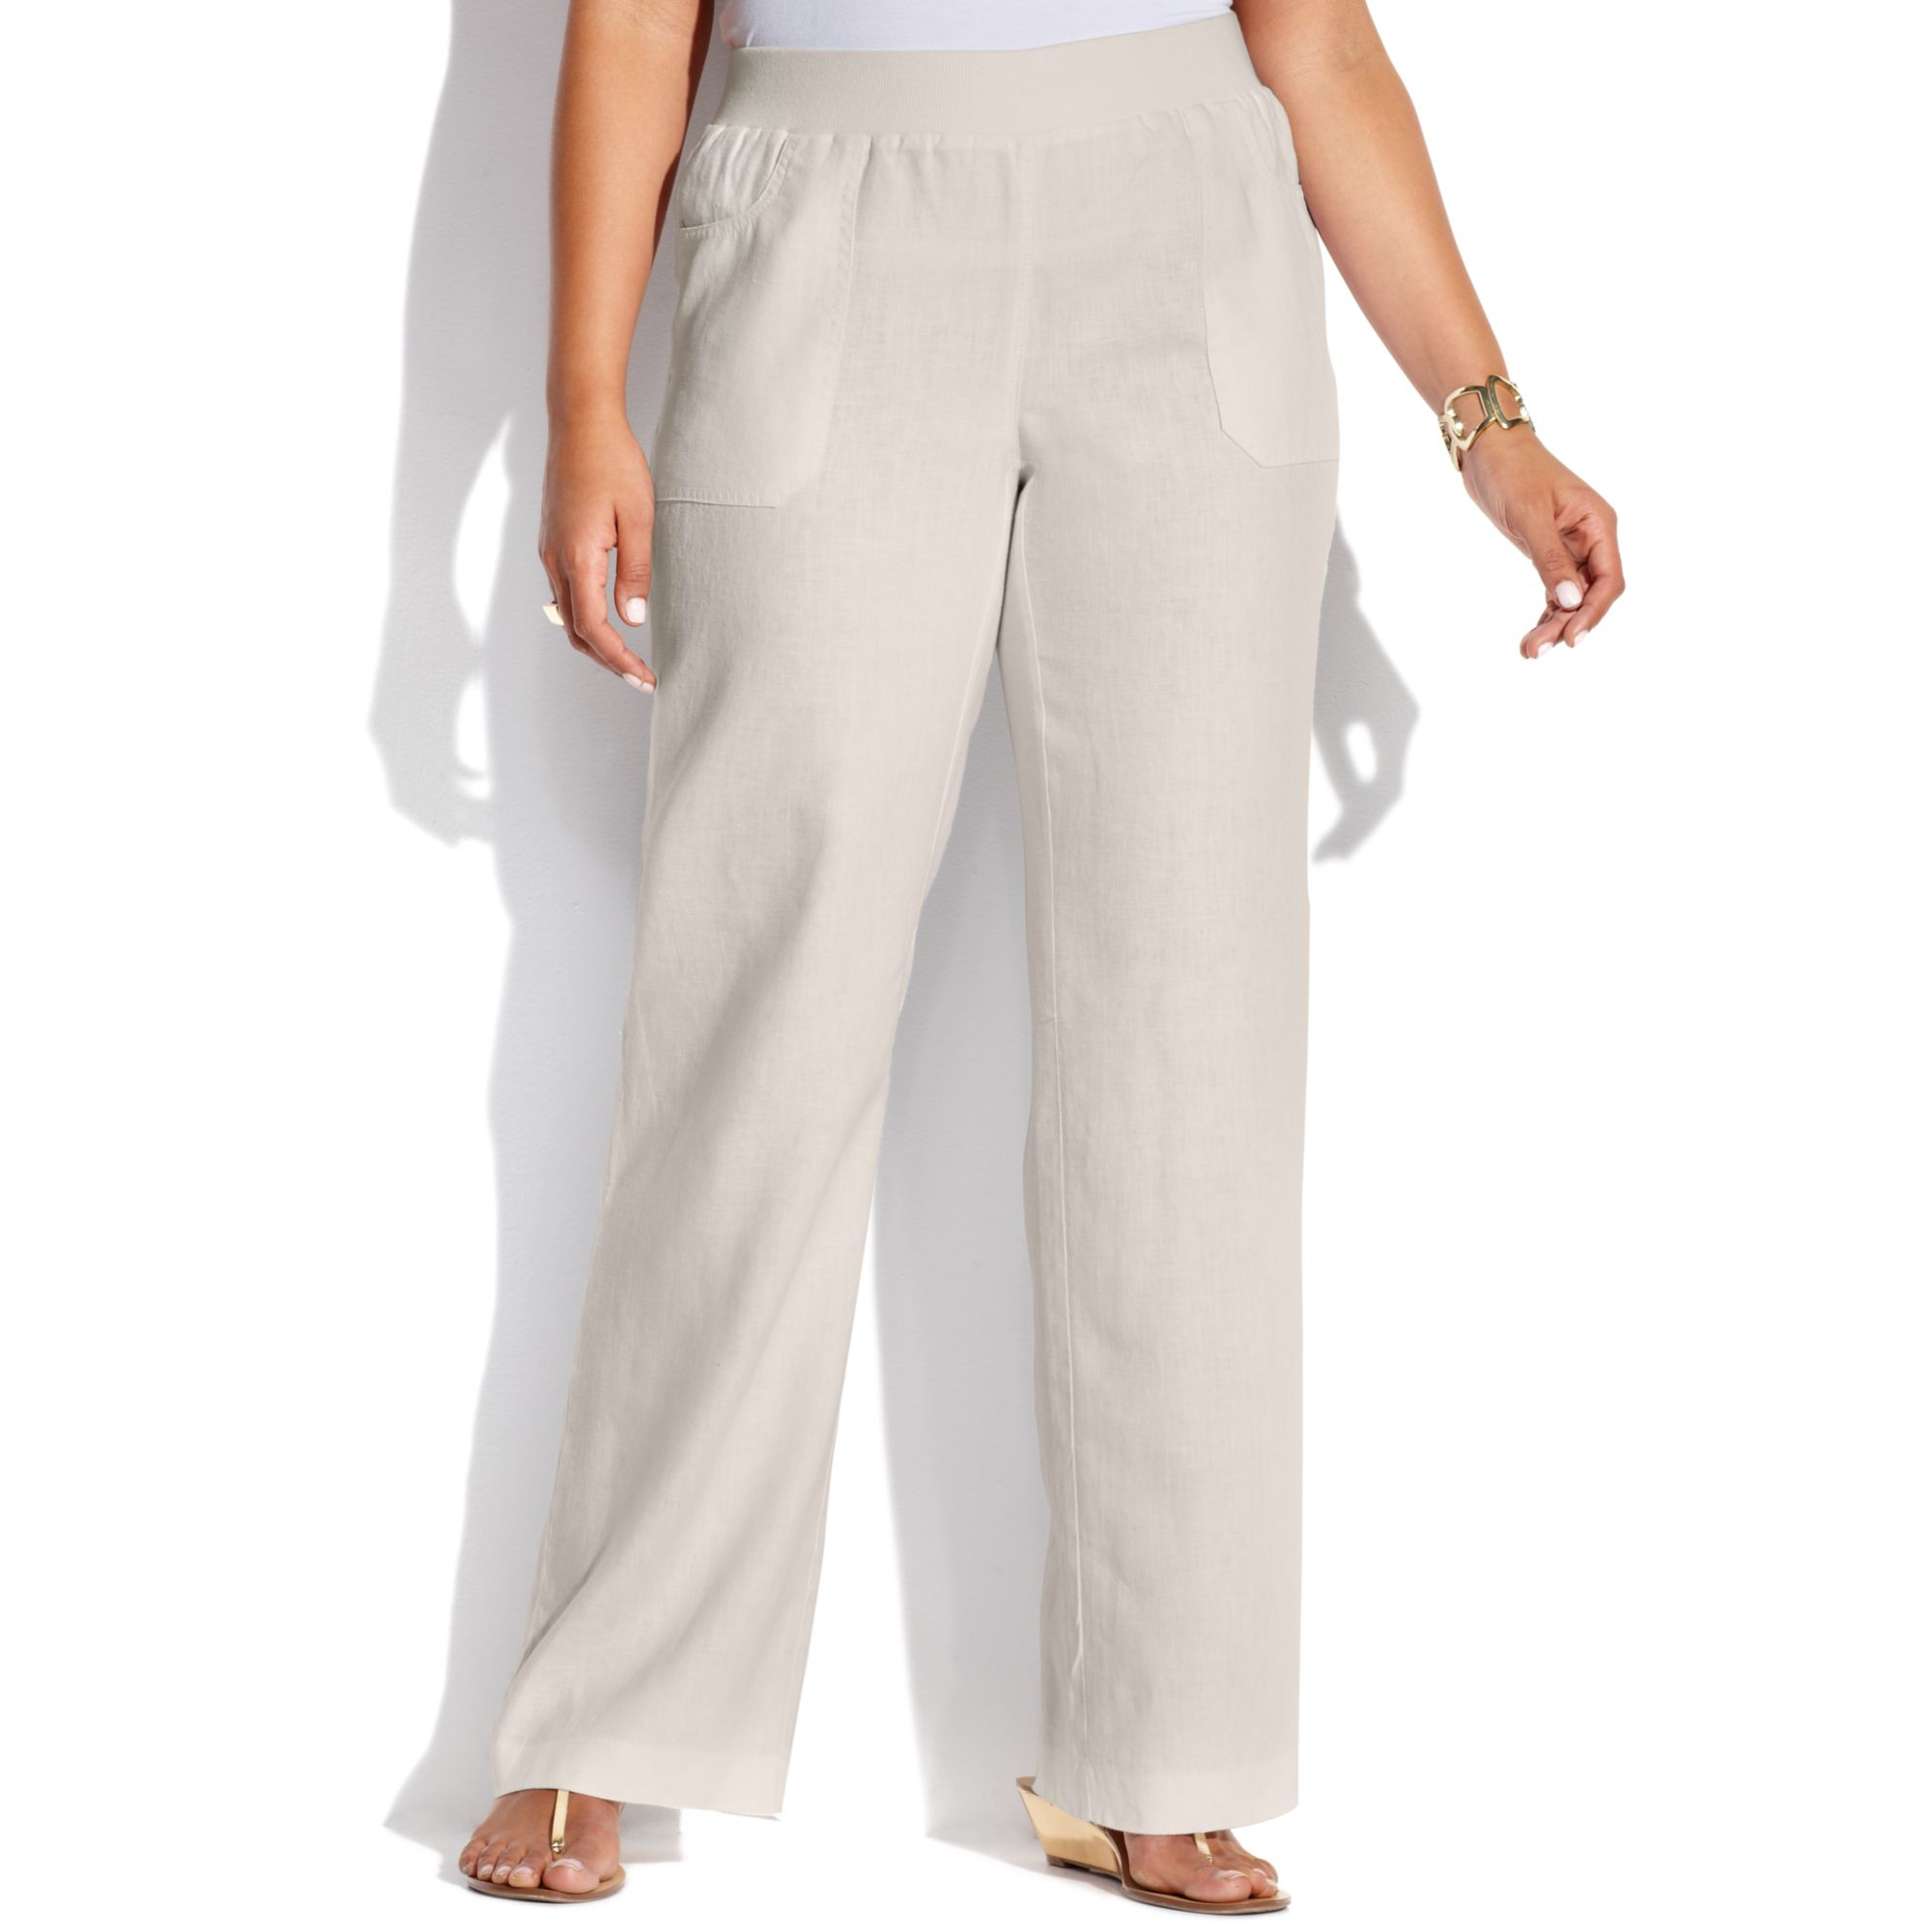 Inc international concepts Plus Size Wideleg Linen Pants in Natural | Lyst